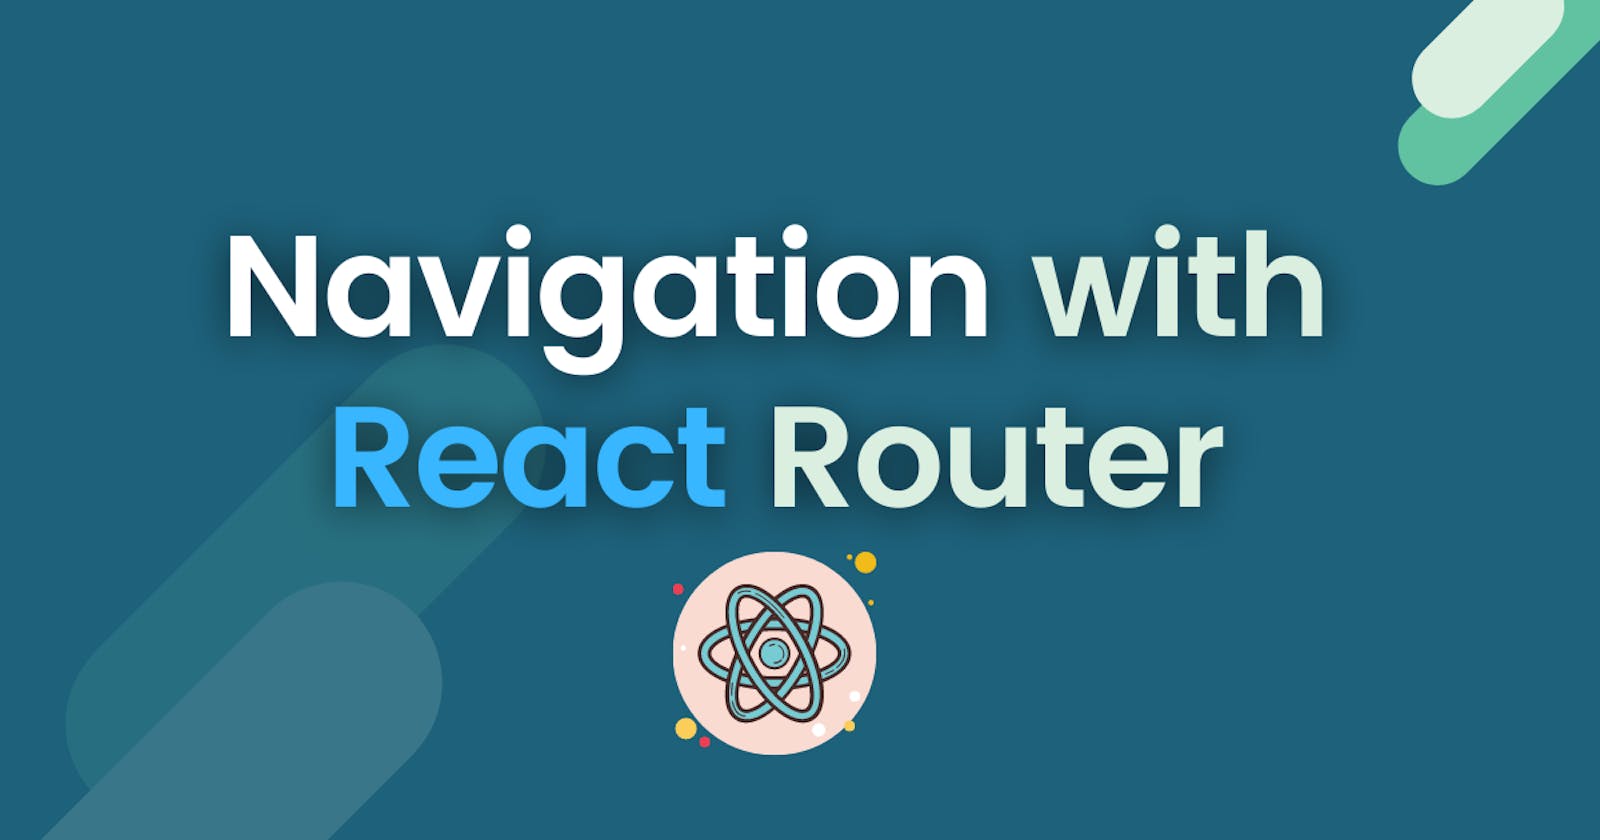 Navigation with React Router